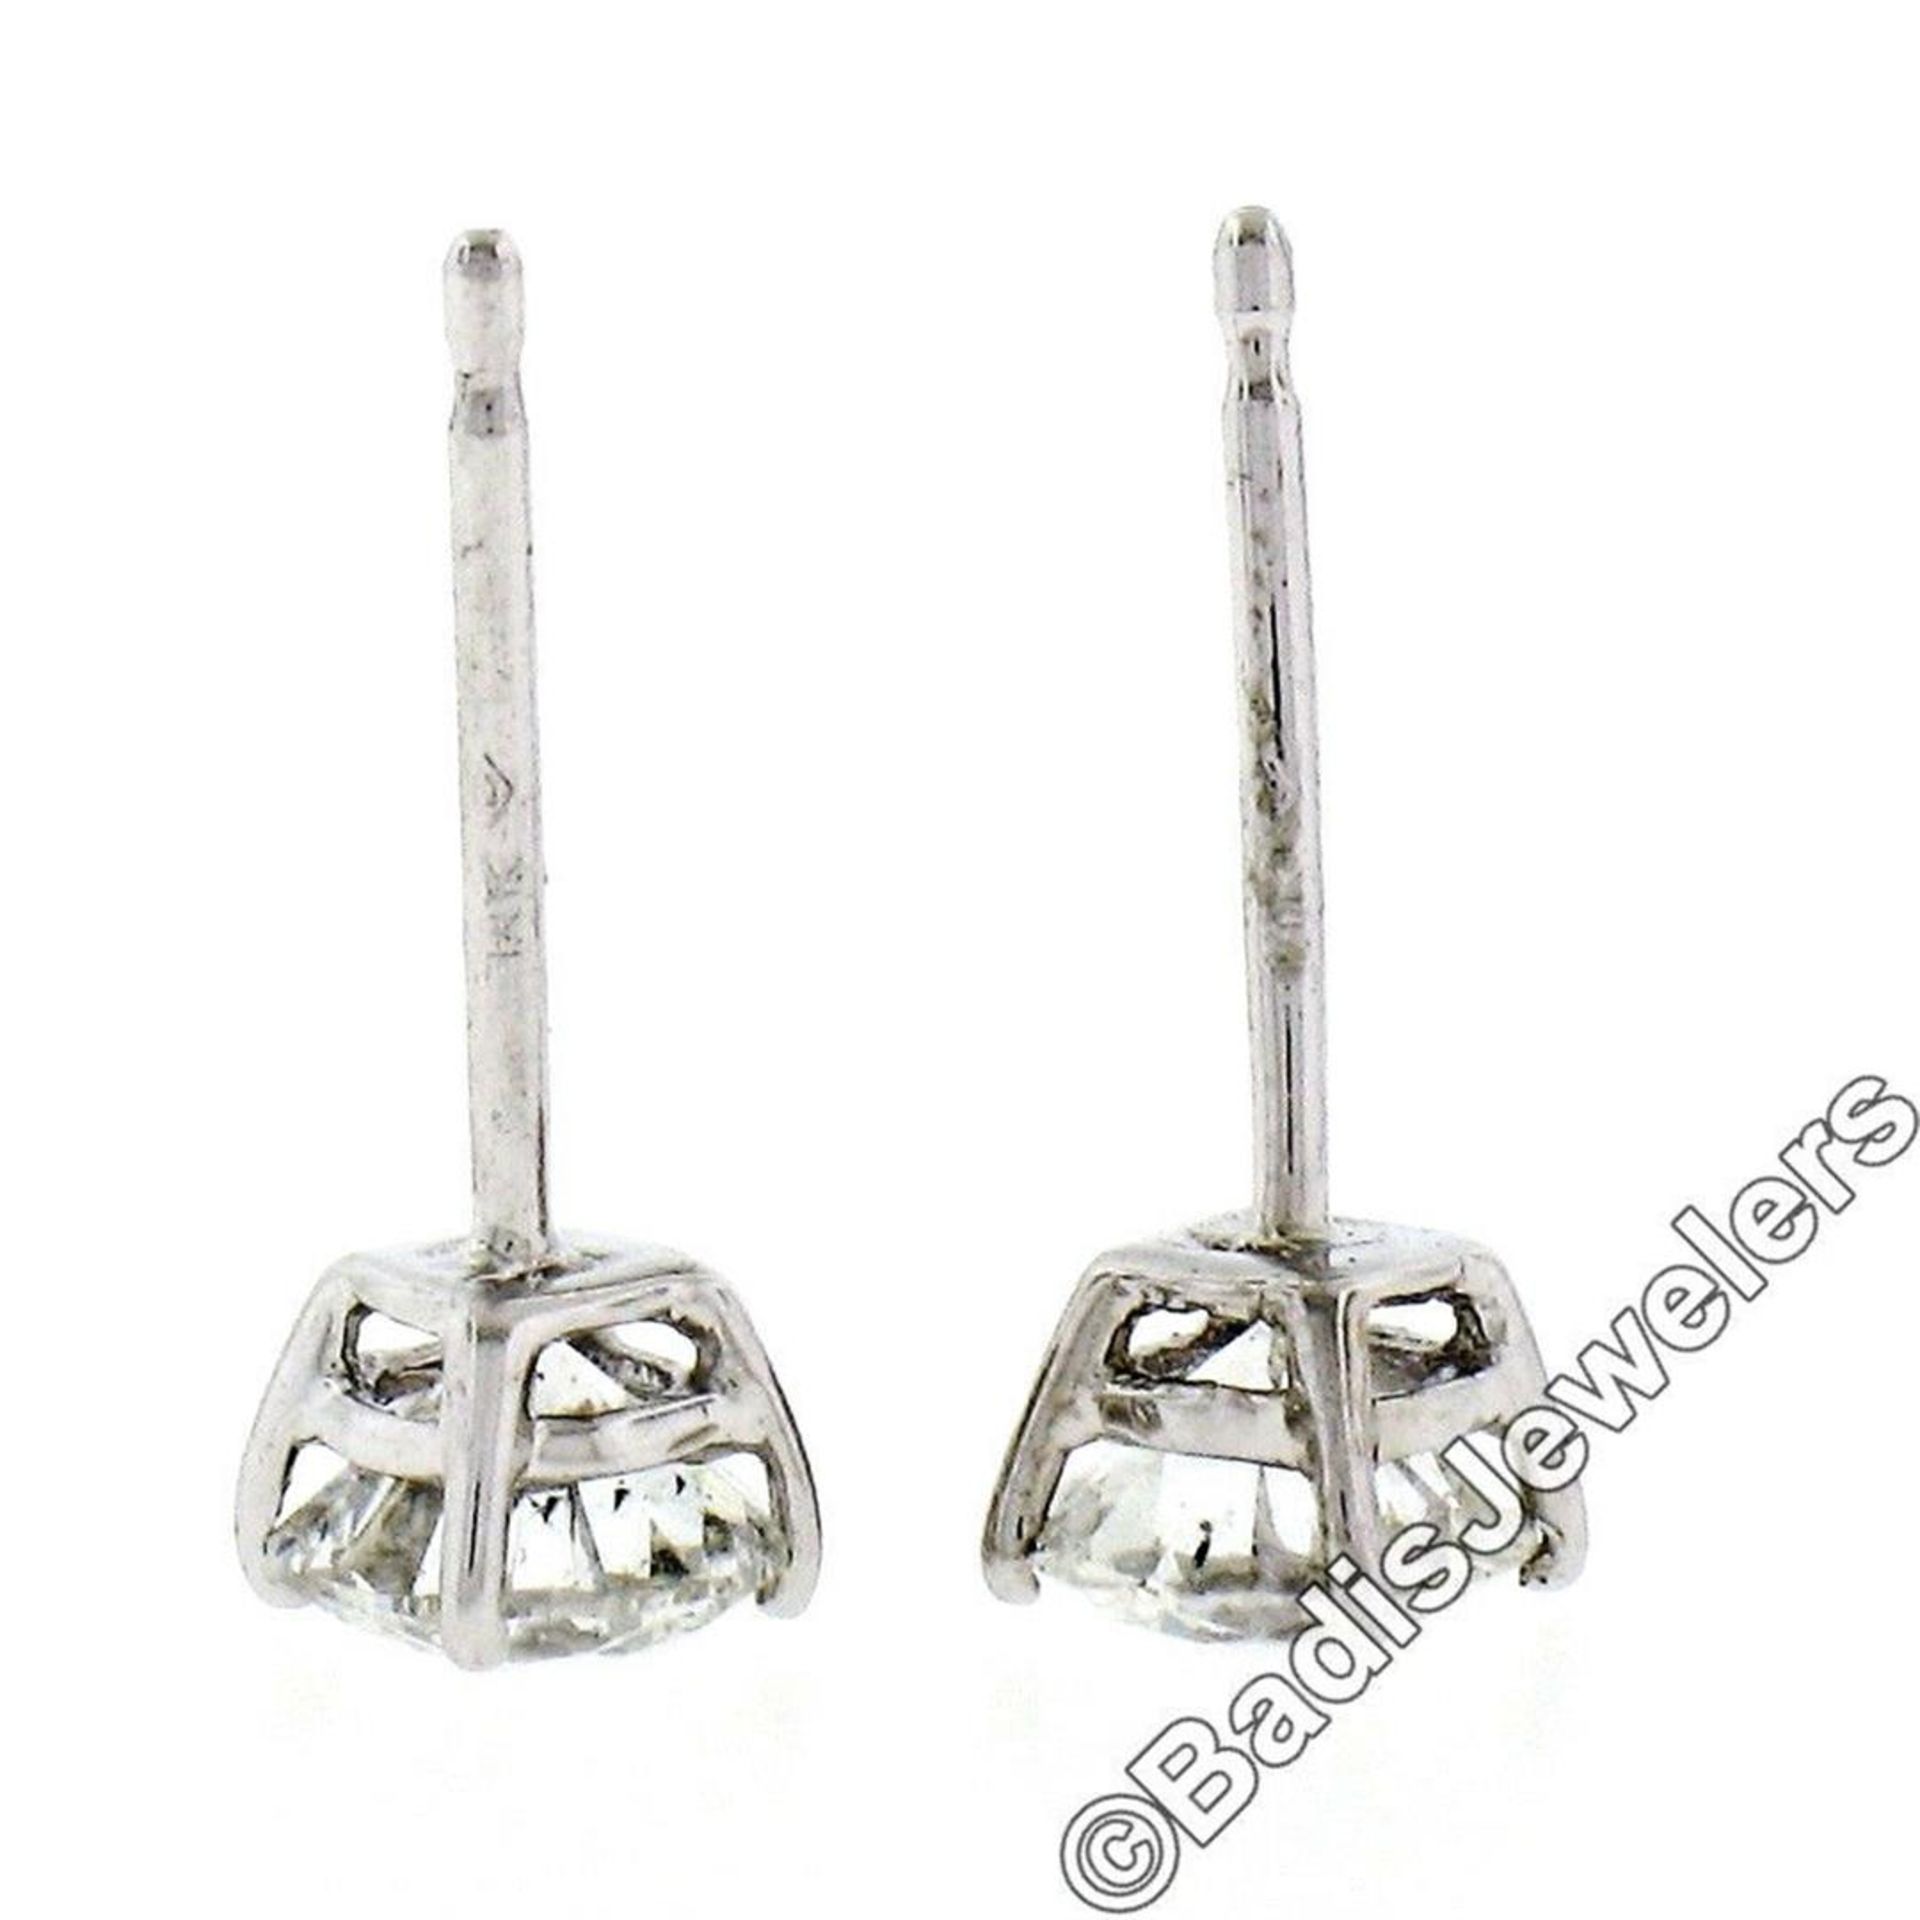 New Classic 14kt White Gold 0.75ctw Round Brilliant Diamond Stud Earrings - Image 4 of 6